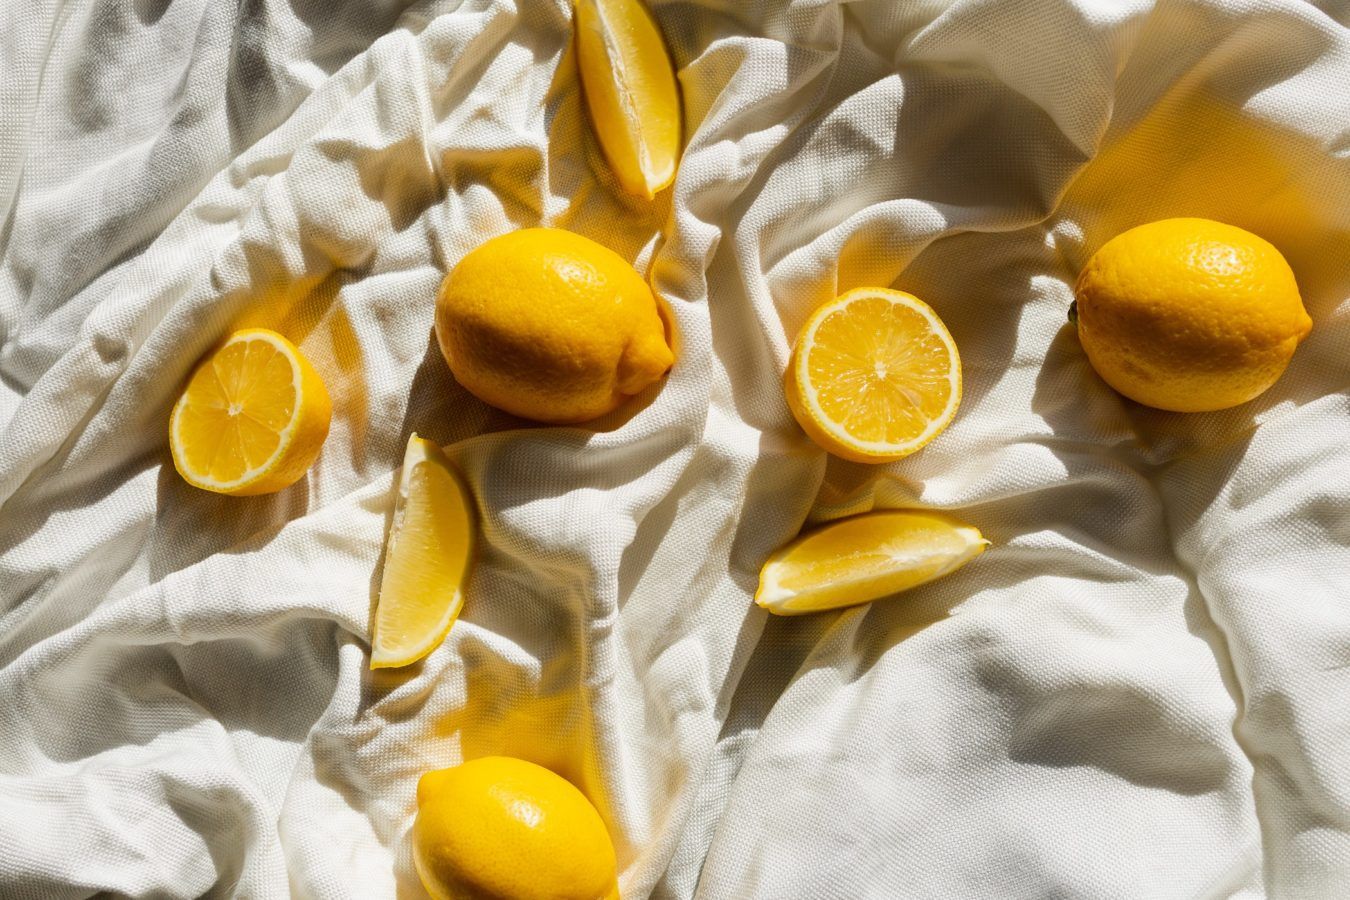 Here’s why you should incorporate lemons into your everyday diet